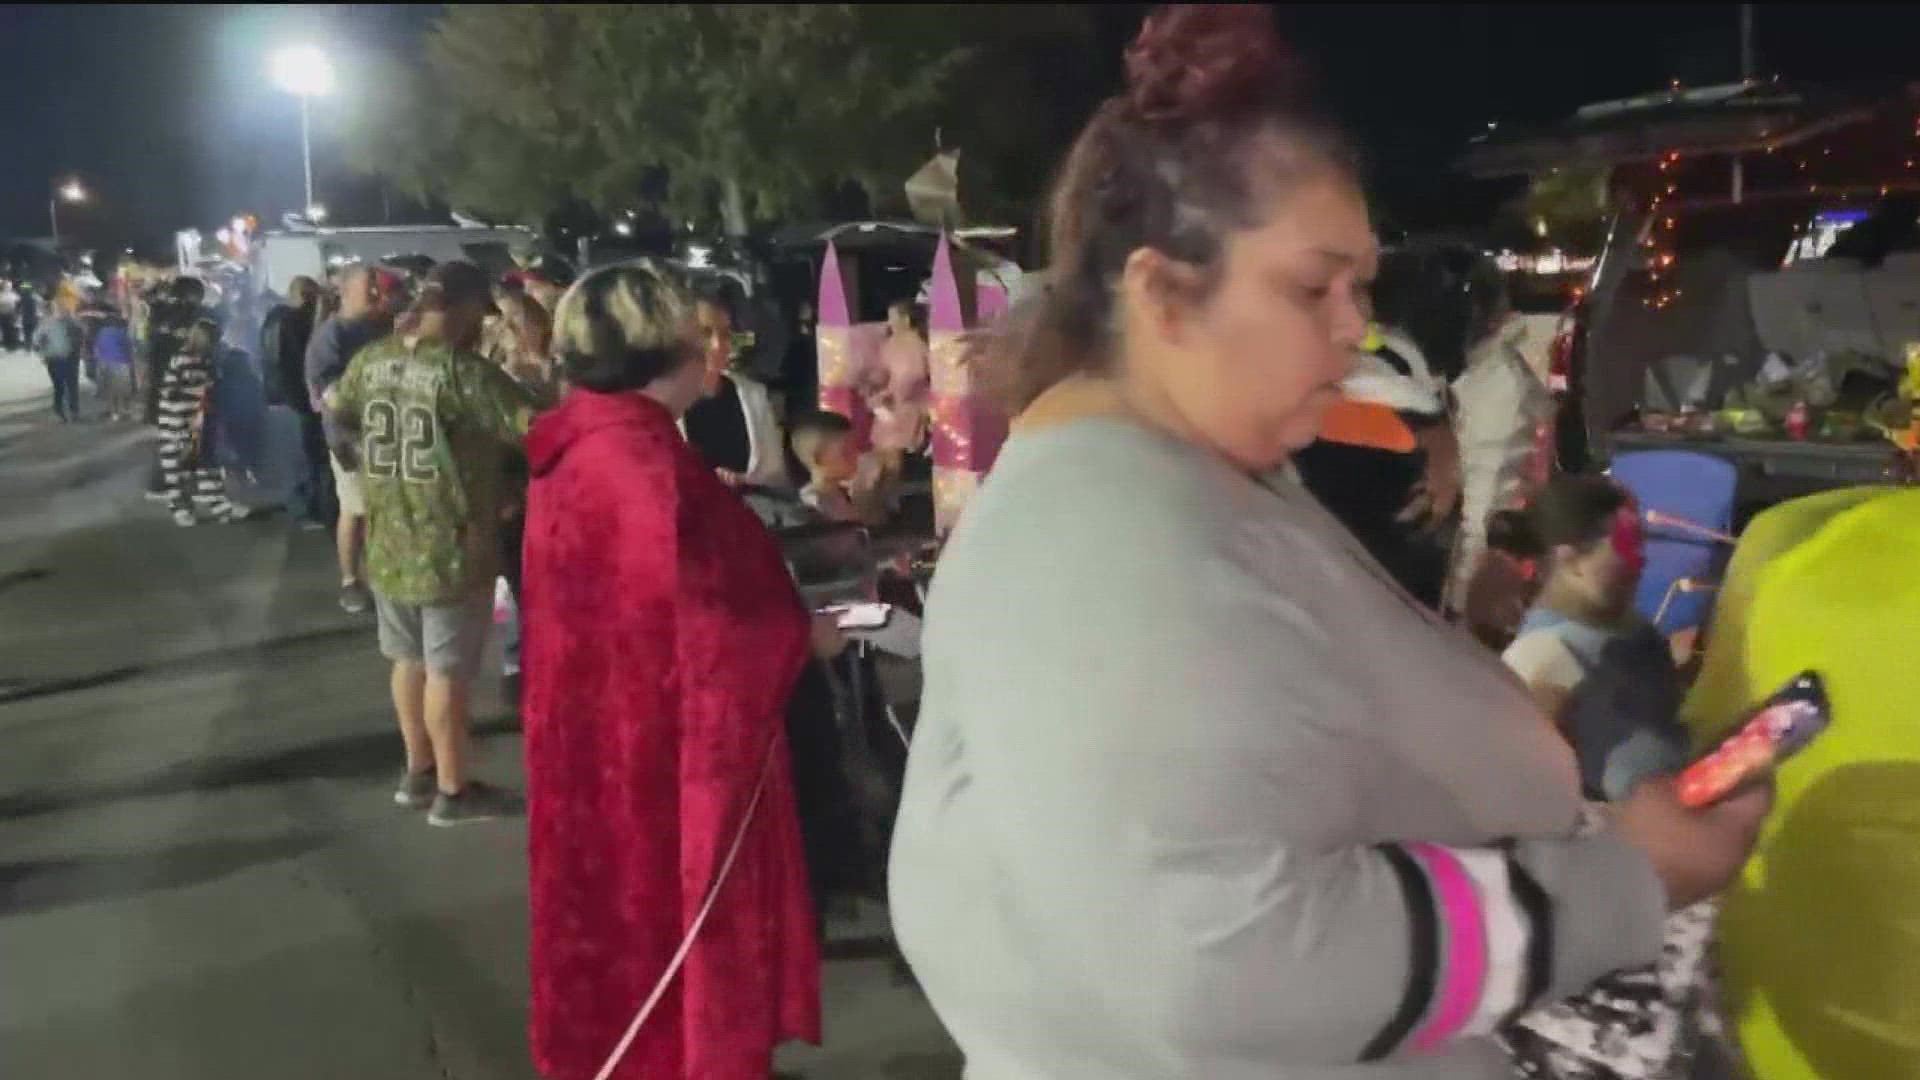 A trunk-or-treat hosted by Oasis Church San Diego drew more than a thousand people to enjoy a safe space decked out to trunk-or-treat.